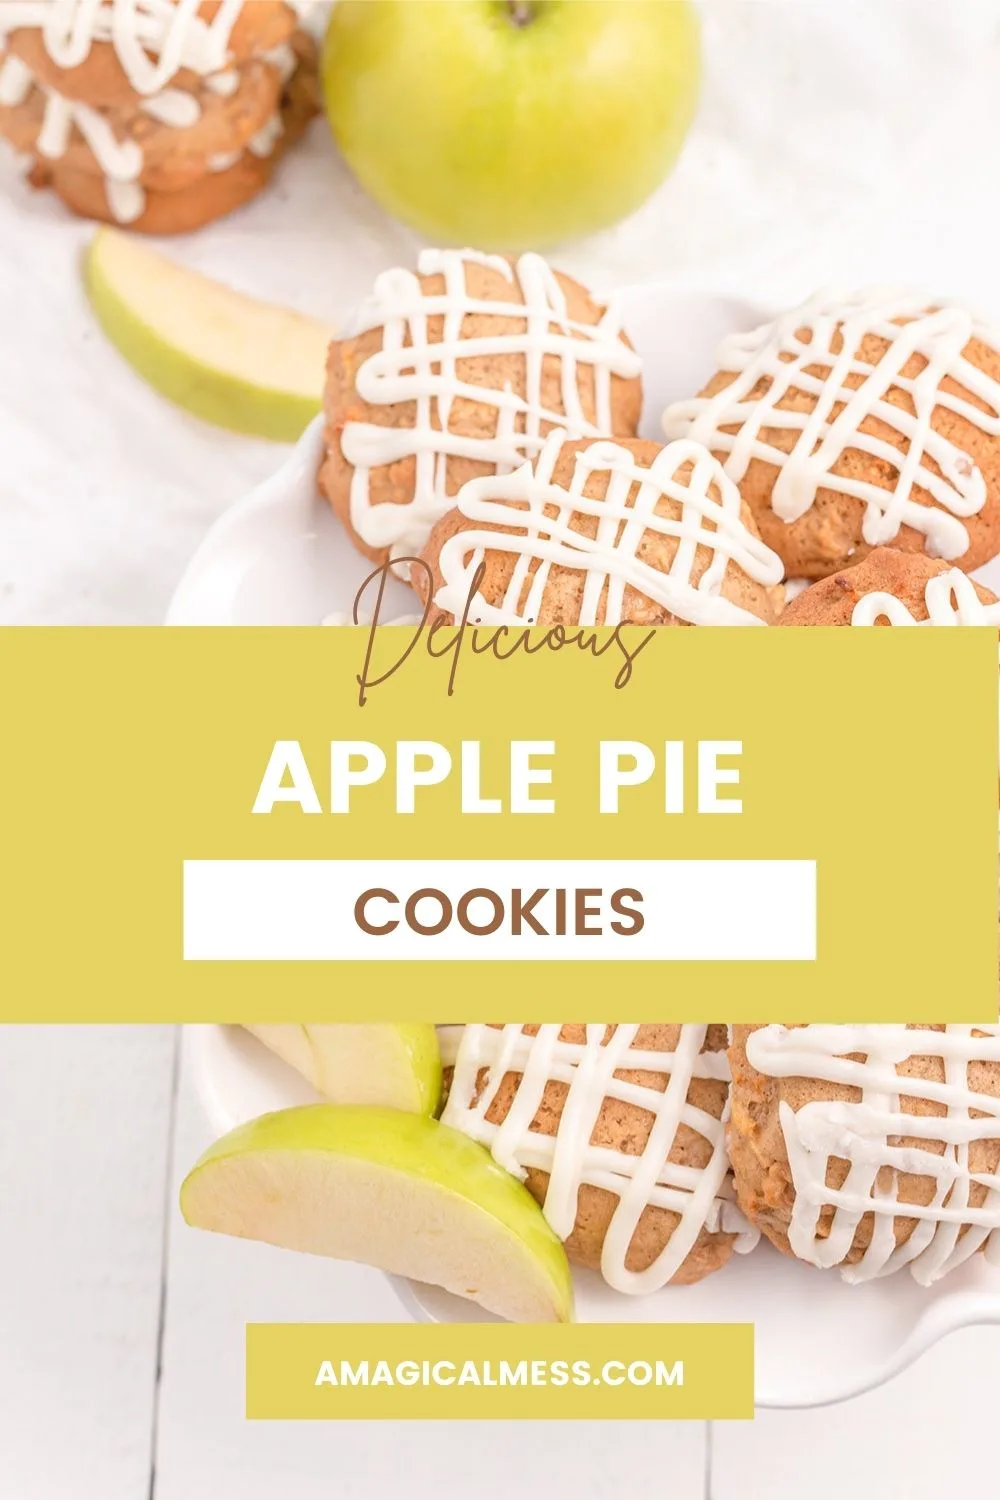 Apple pie cookies with glaze next to green apple slices.